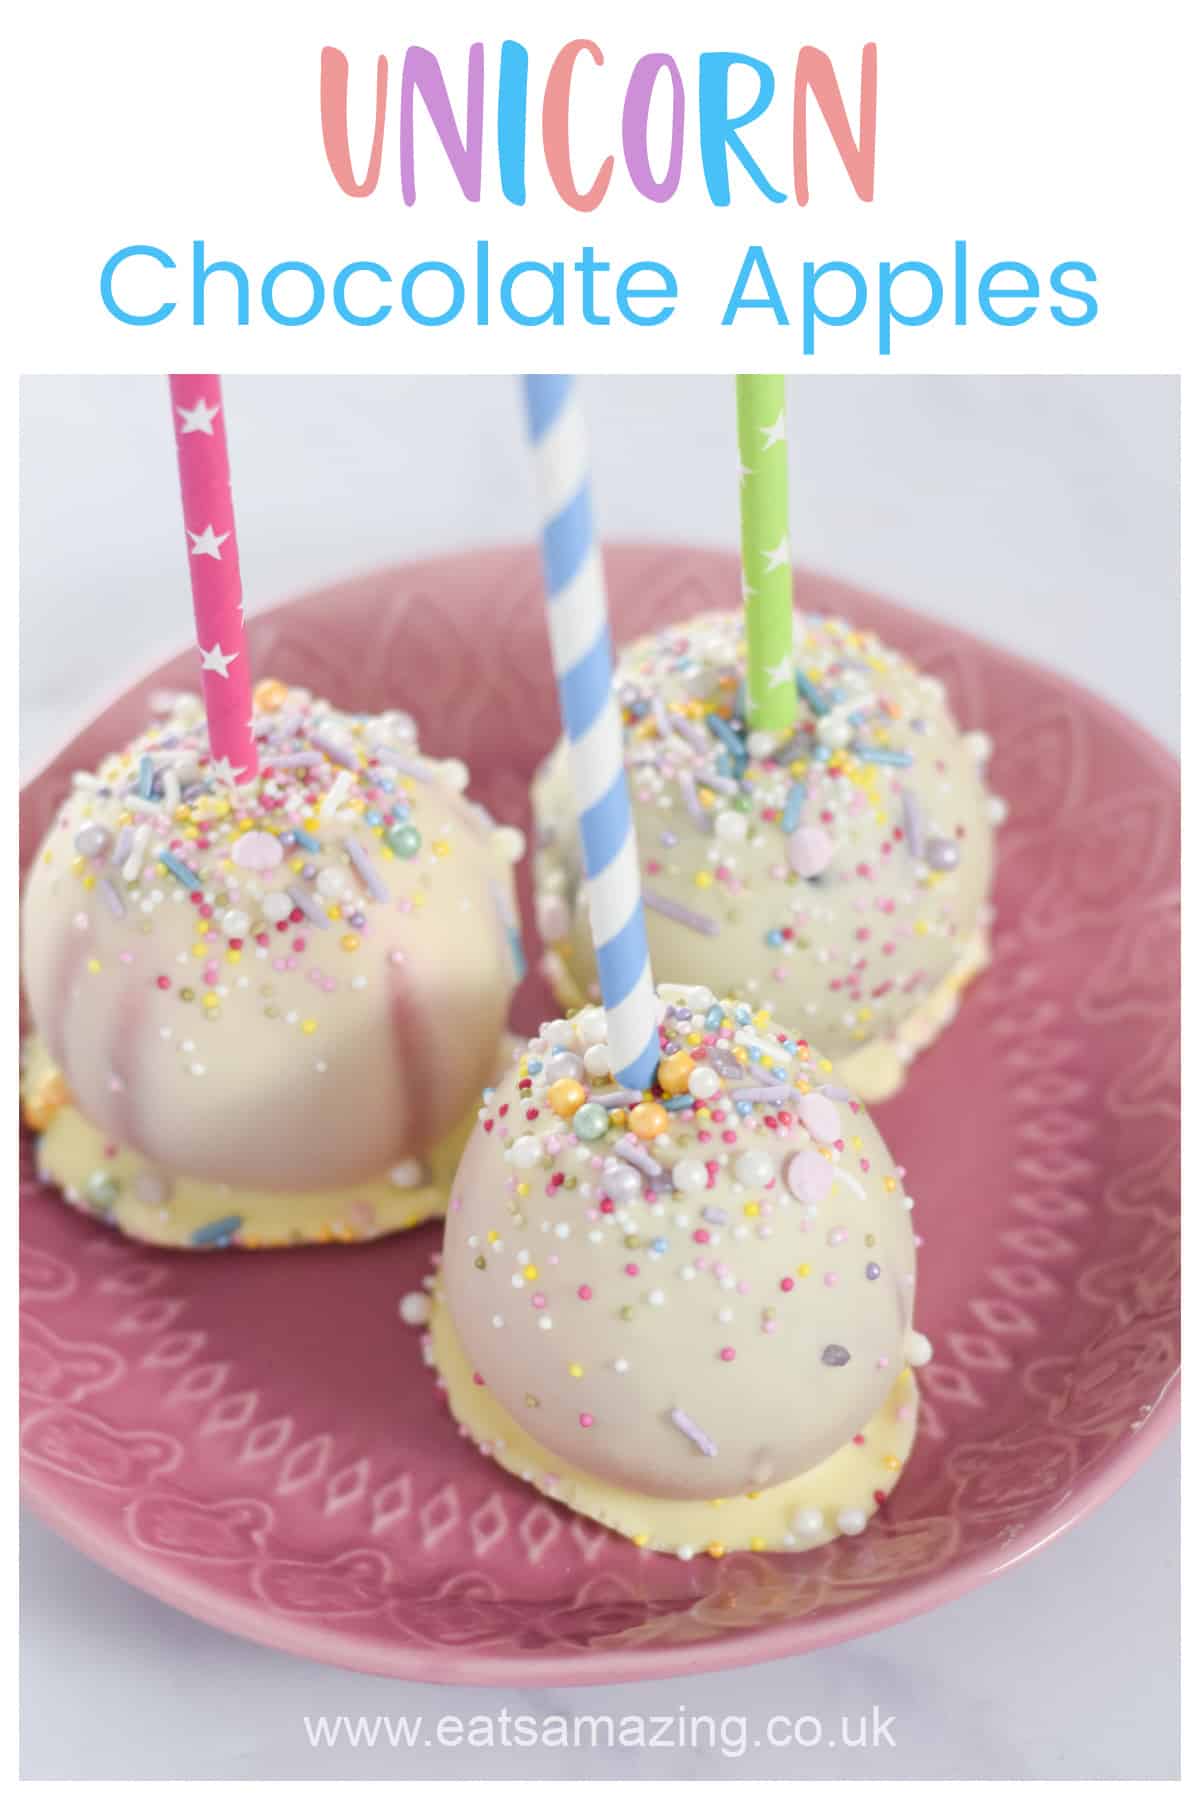 Cute unicorn themed chocolate dipped apples - perfect for unicorn themed party food or a fun bonfire night treat for kids